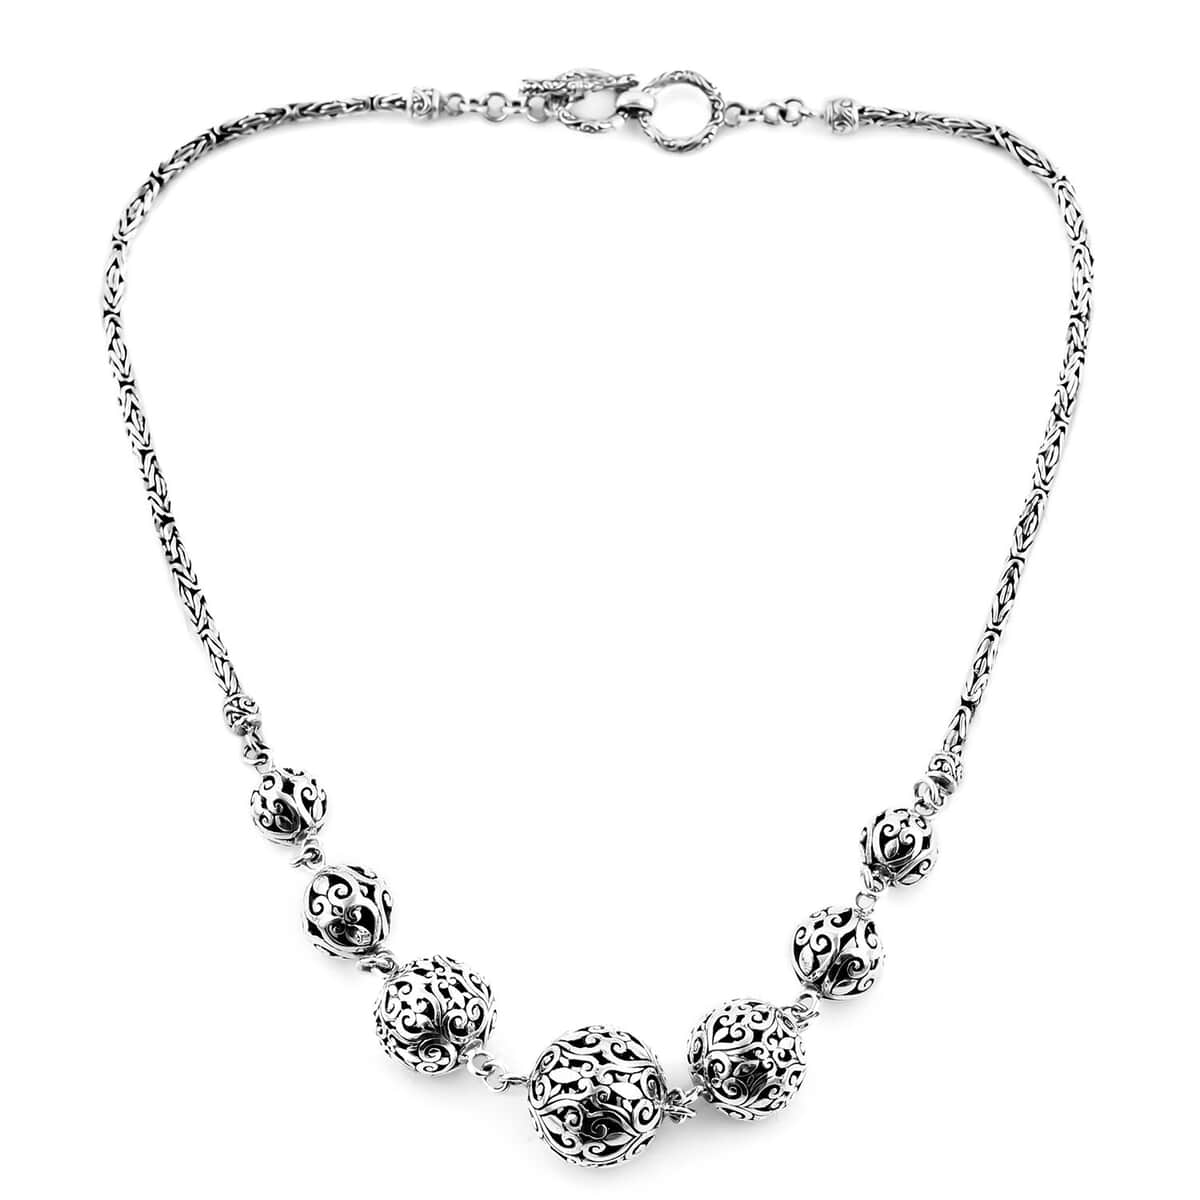 Bali Legacy Sterling Silver Filigree Ball Toggle Clasp Necklace 18-19 Inches 34.75 Grams image number 3